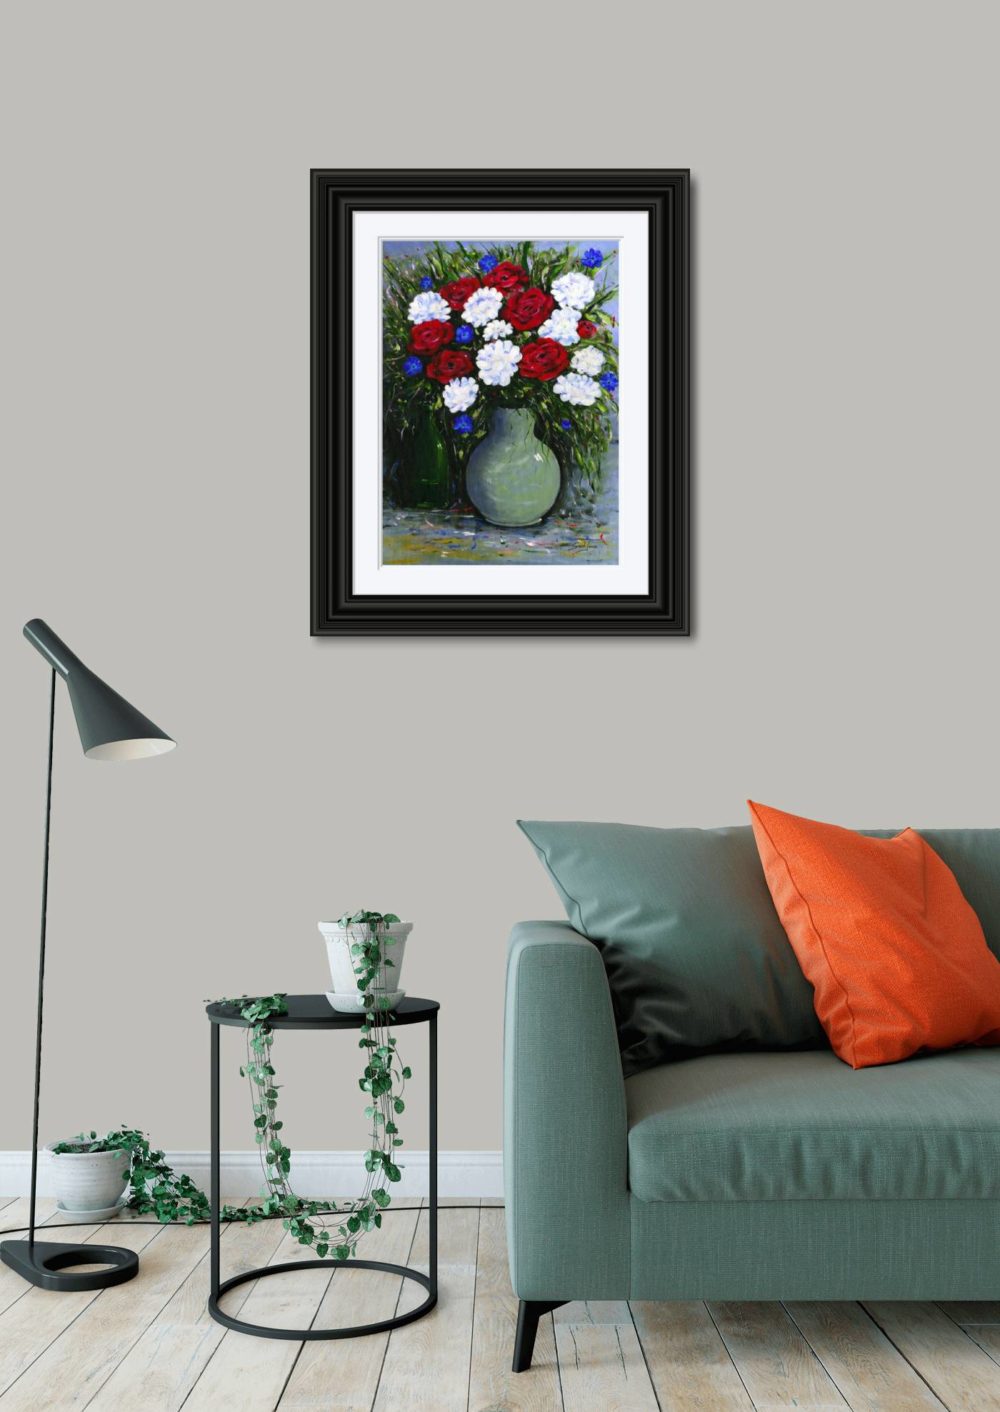 Cornflowers and Roses in Black Frame in room